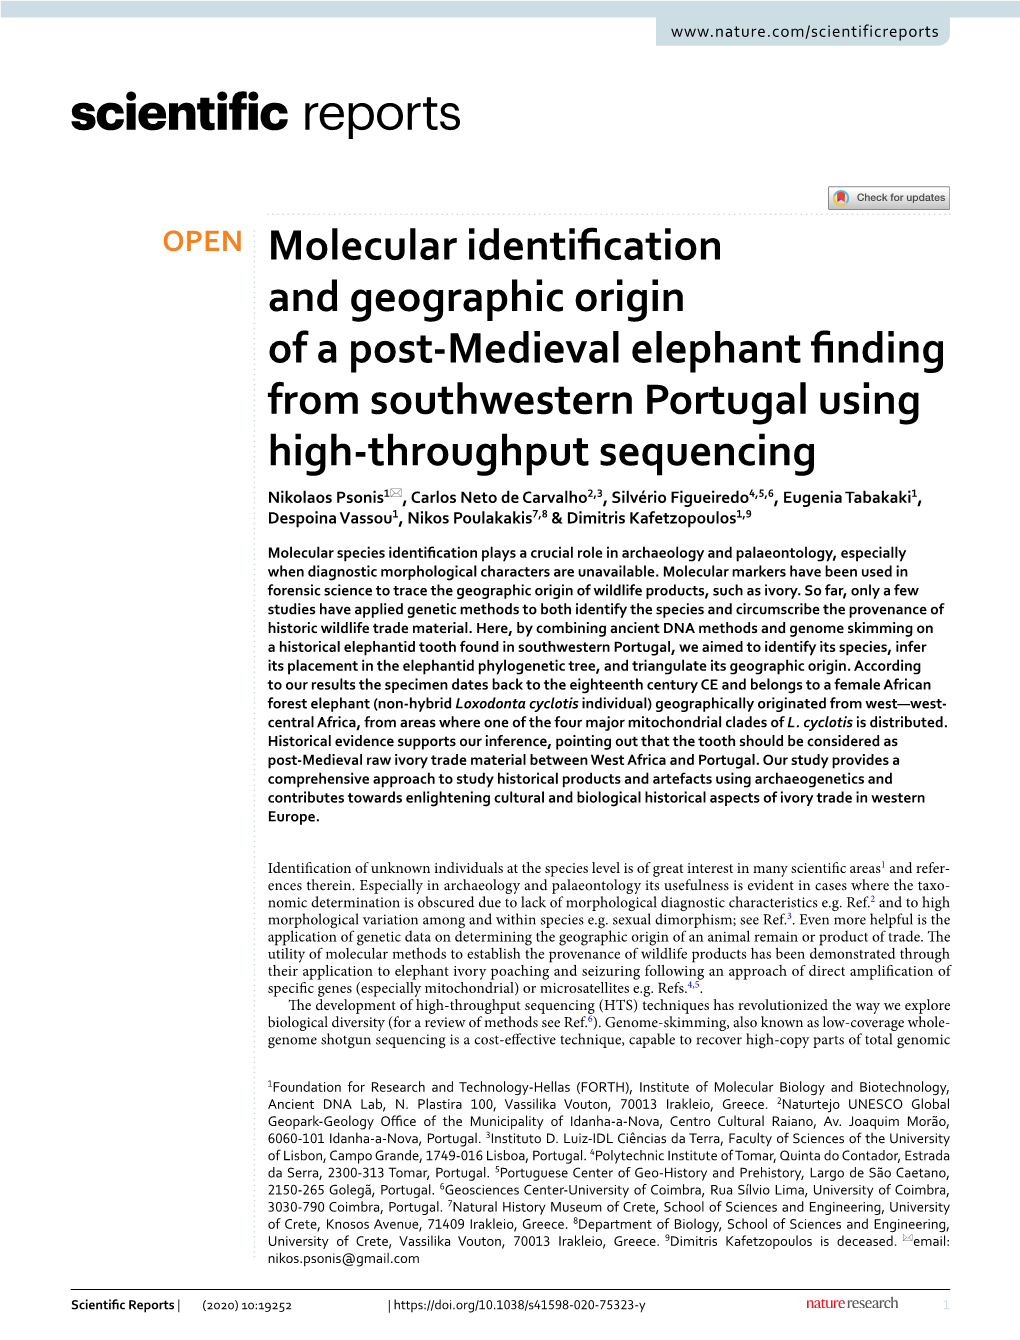 Molecular Identification and Geographic Origin of a Post